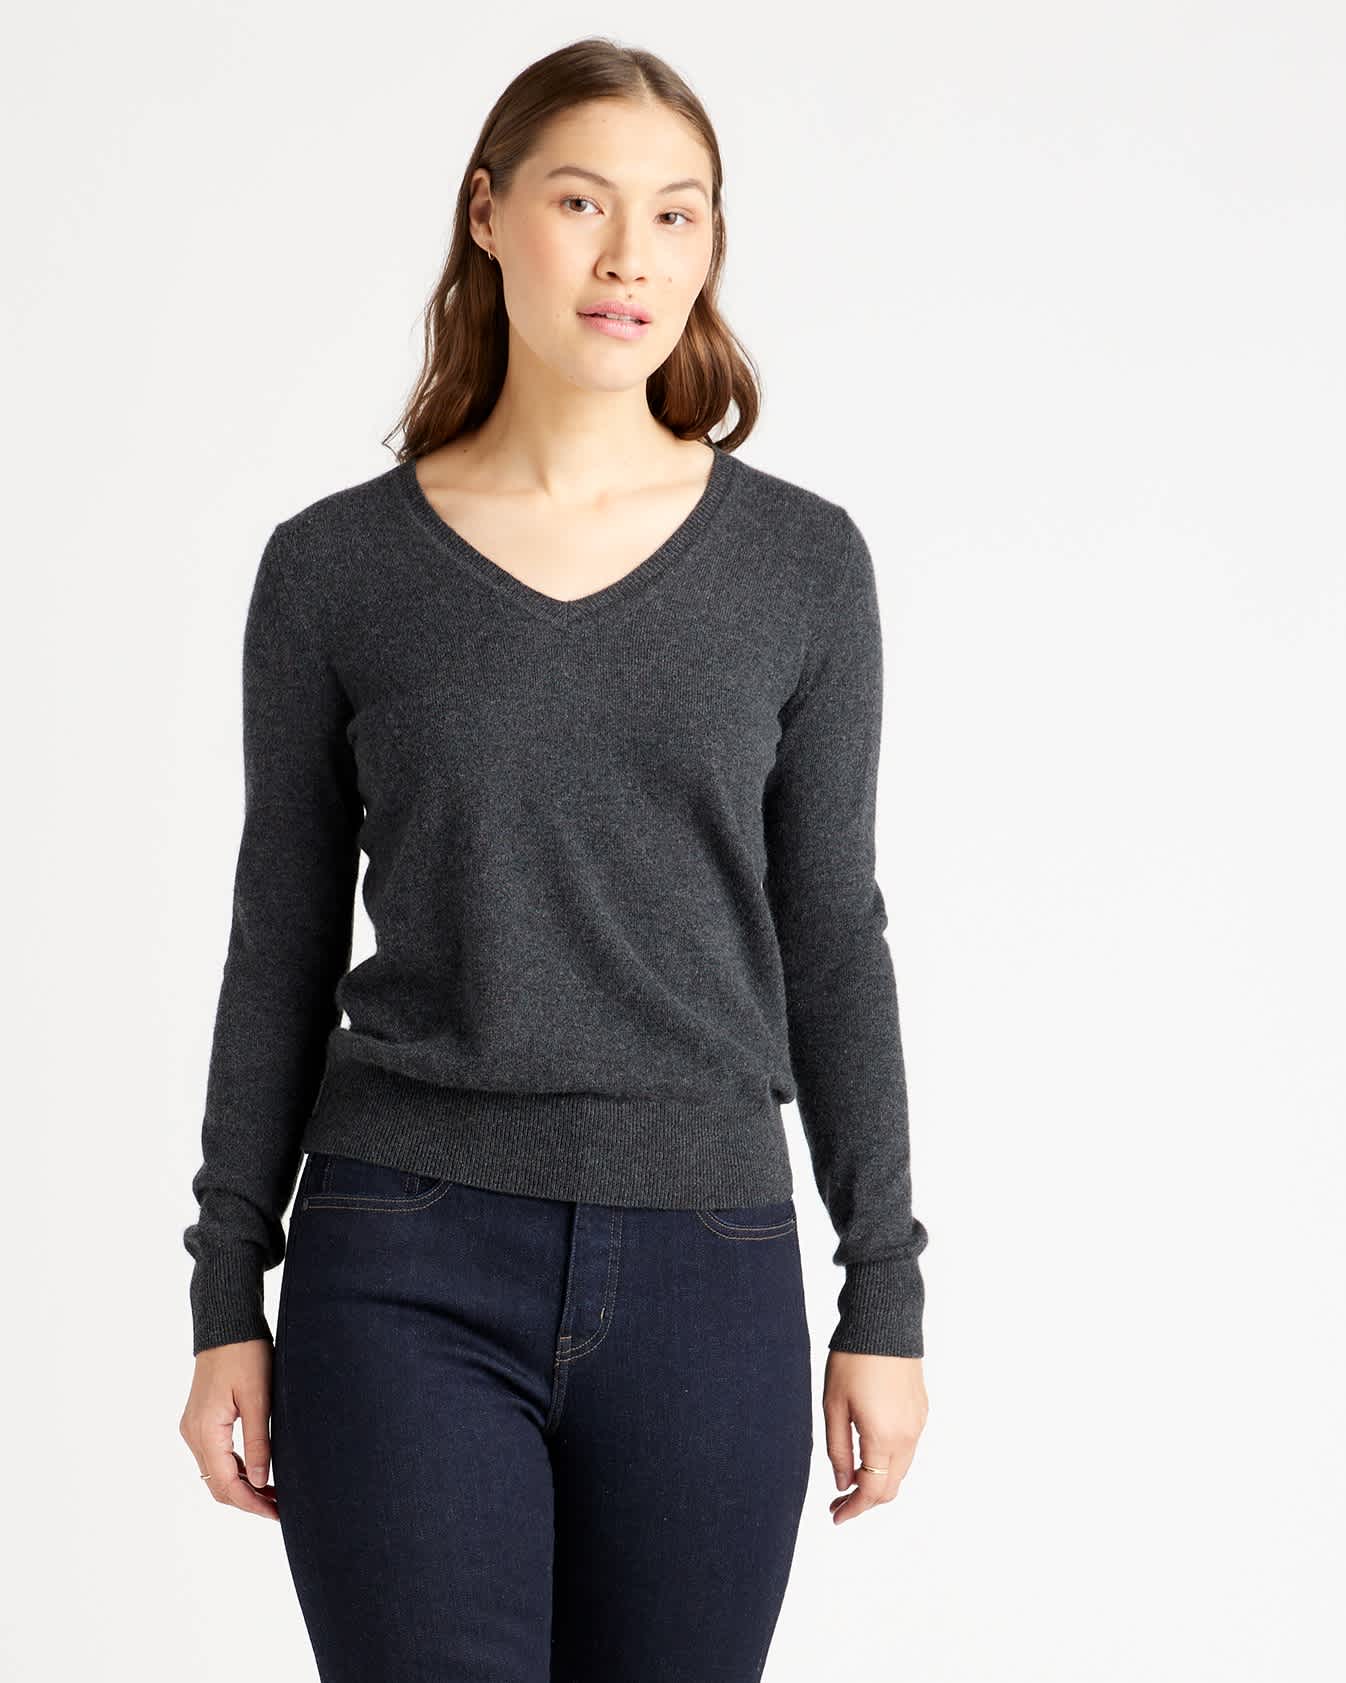 Luxe Baby Cashmere V-Neck Sweater - Charcoal